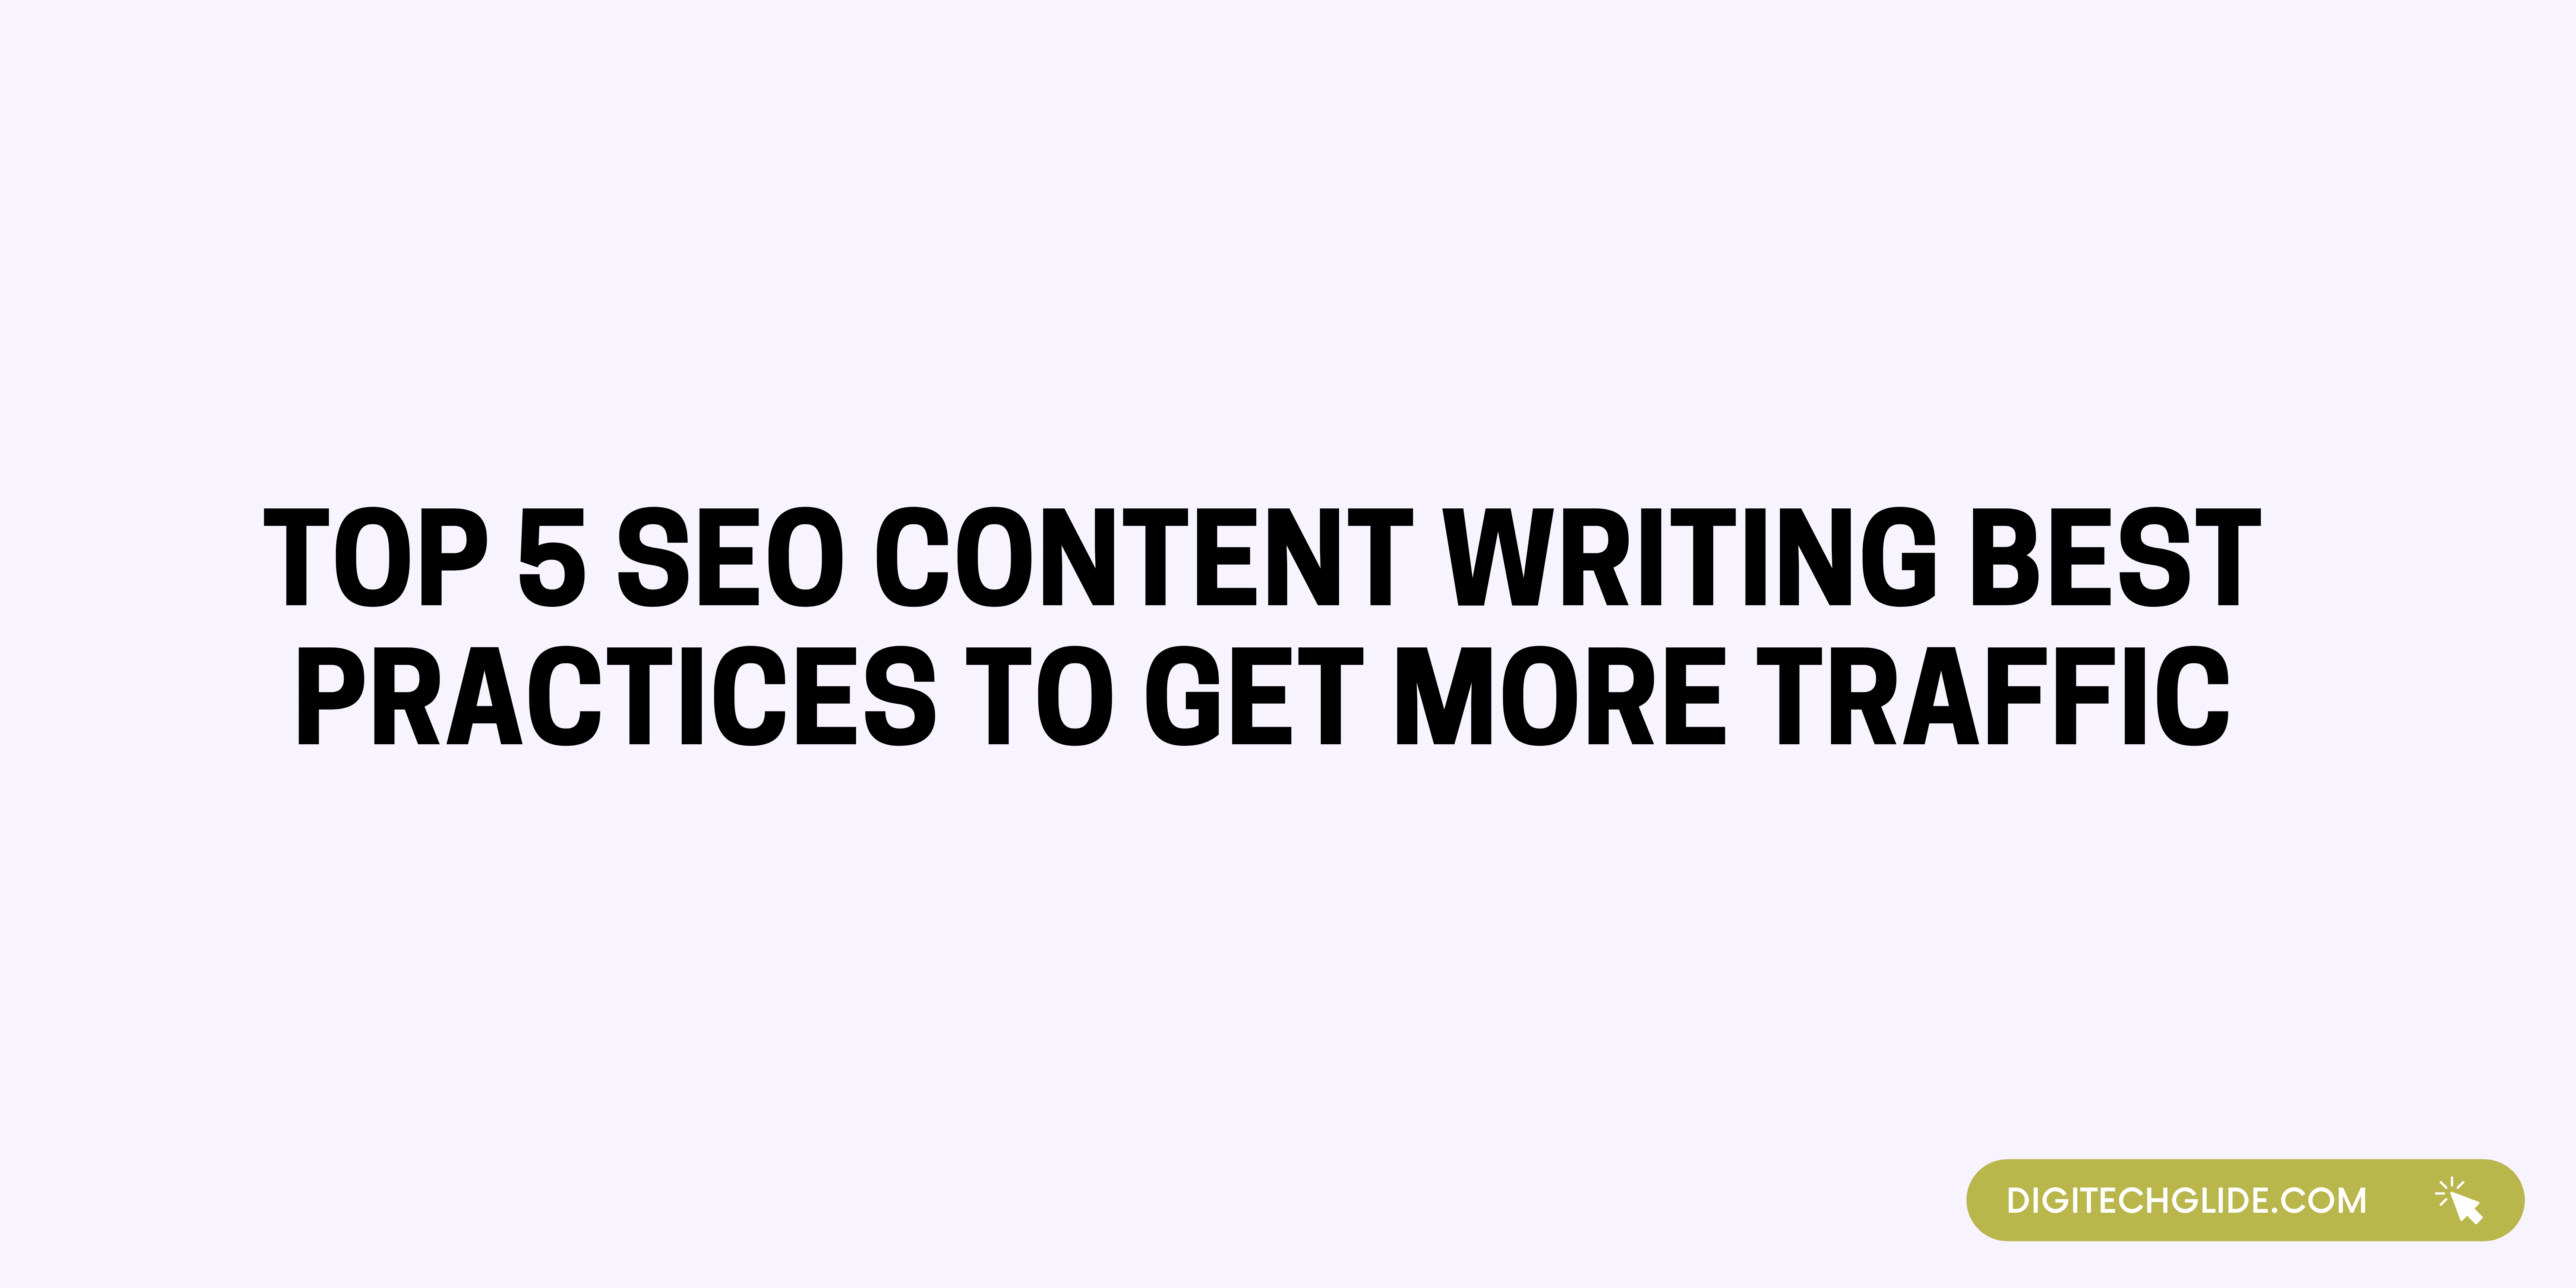 Top 5 SEO Content Writing Best Practices to Get More Traffic